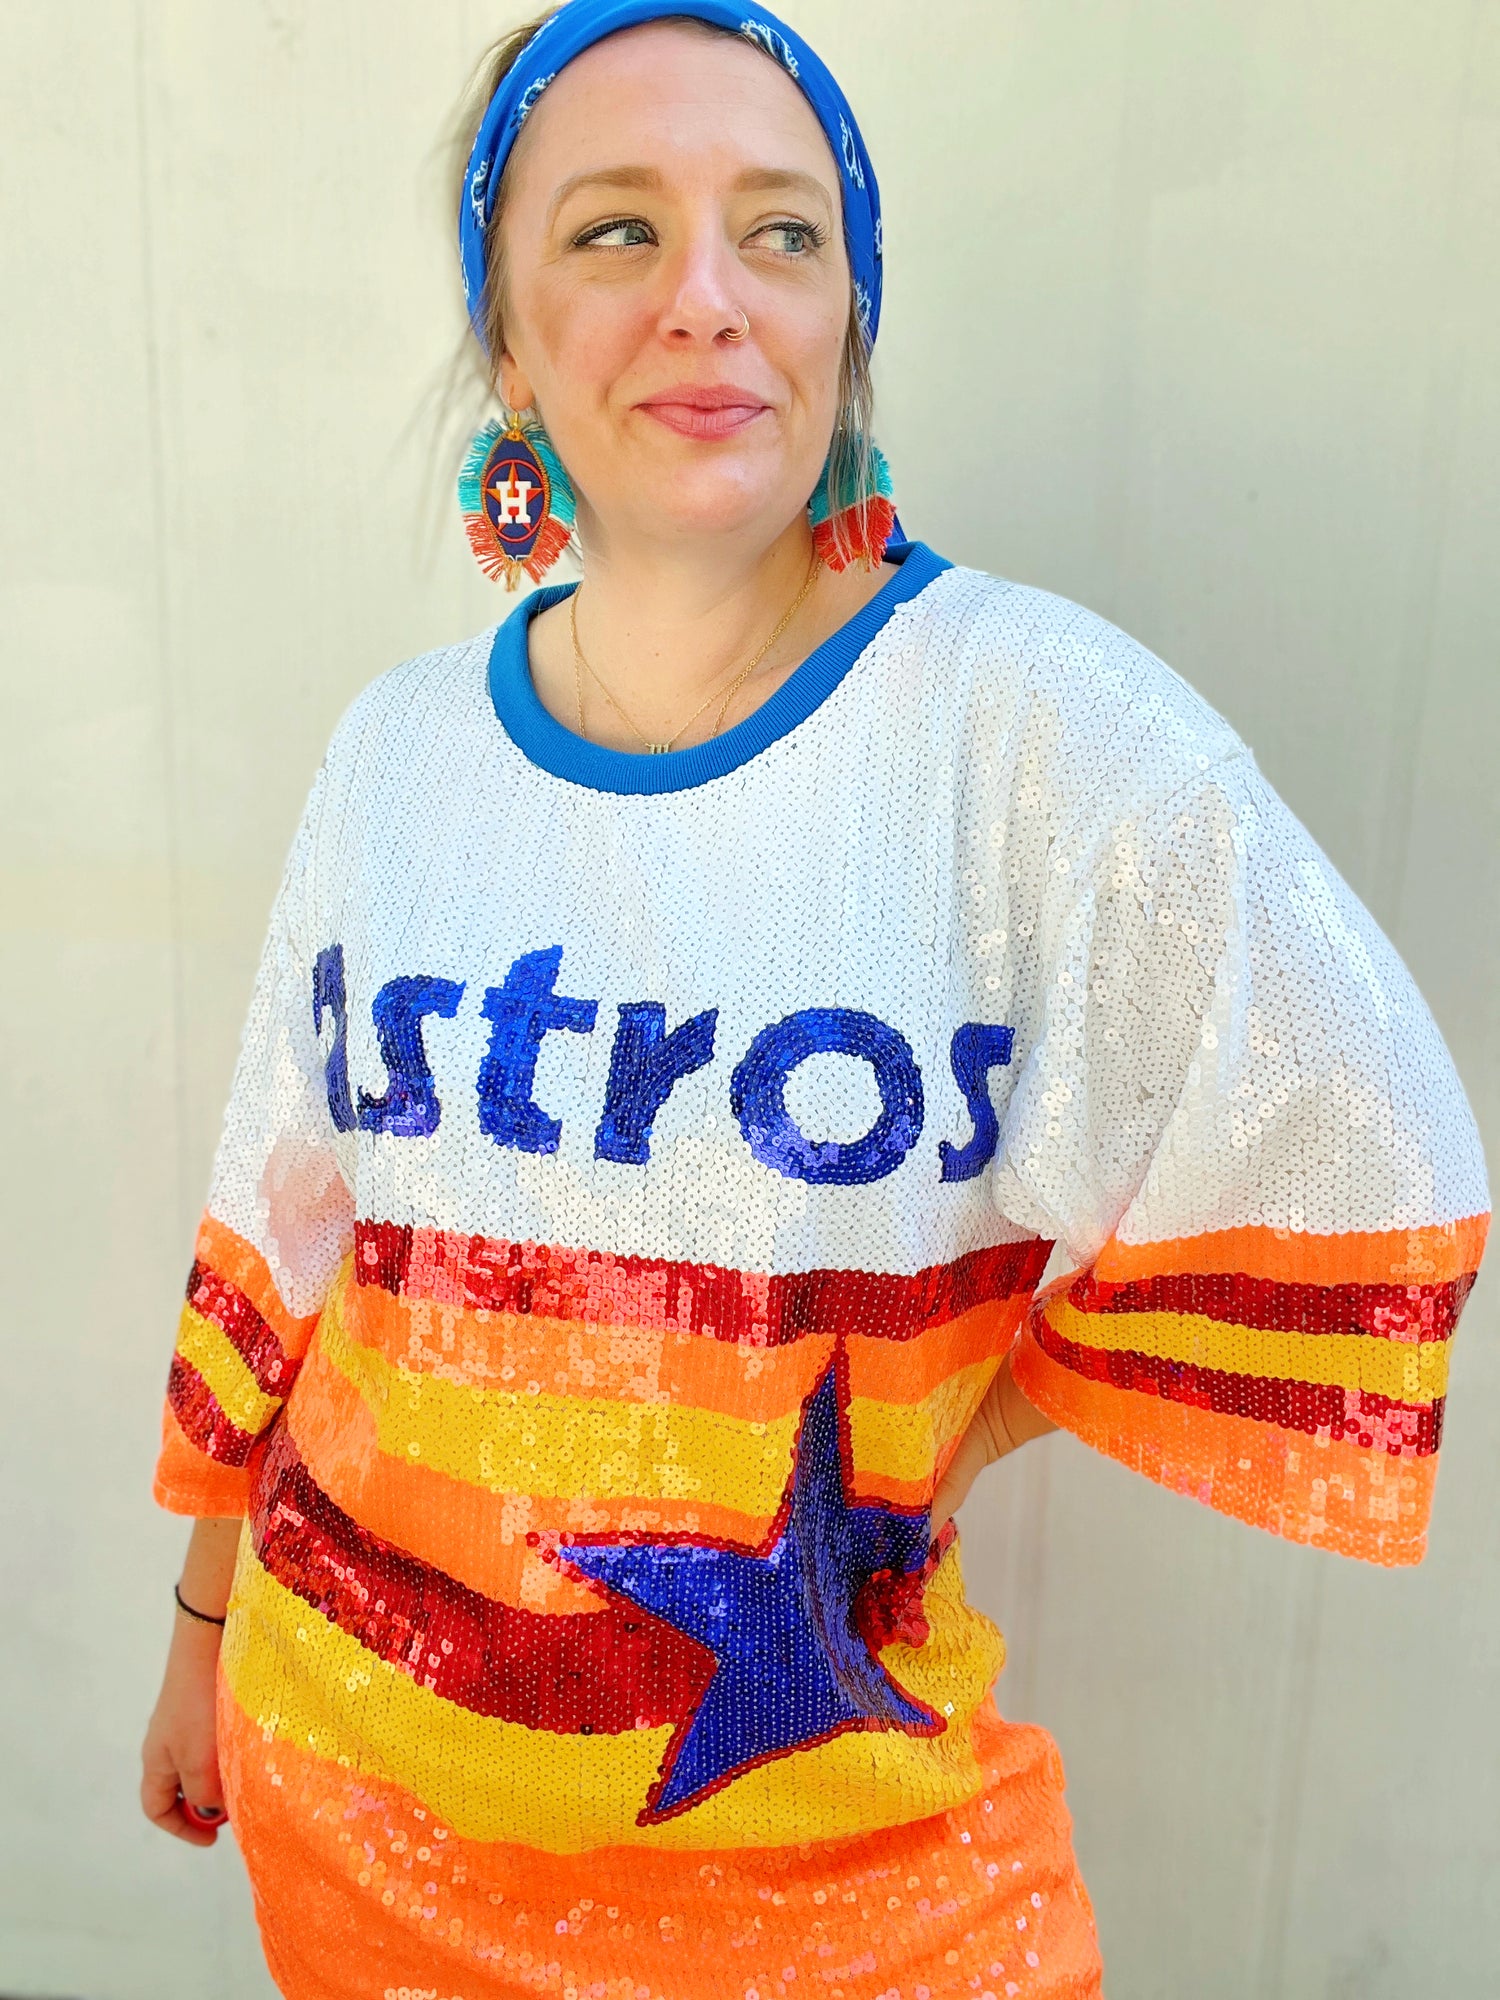 ASTROS SEQUINS ONE SIZE OVERSIZE TOP - BLUE